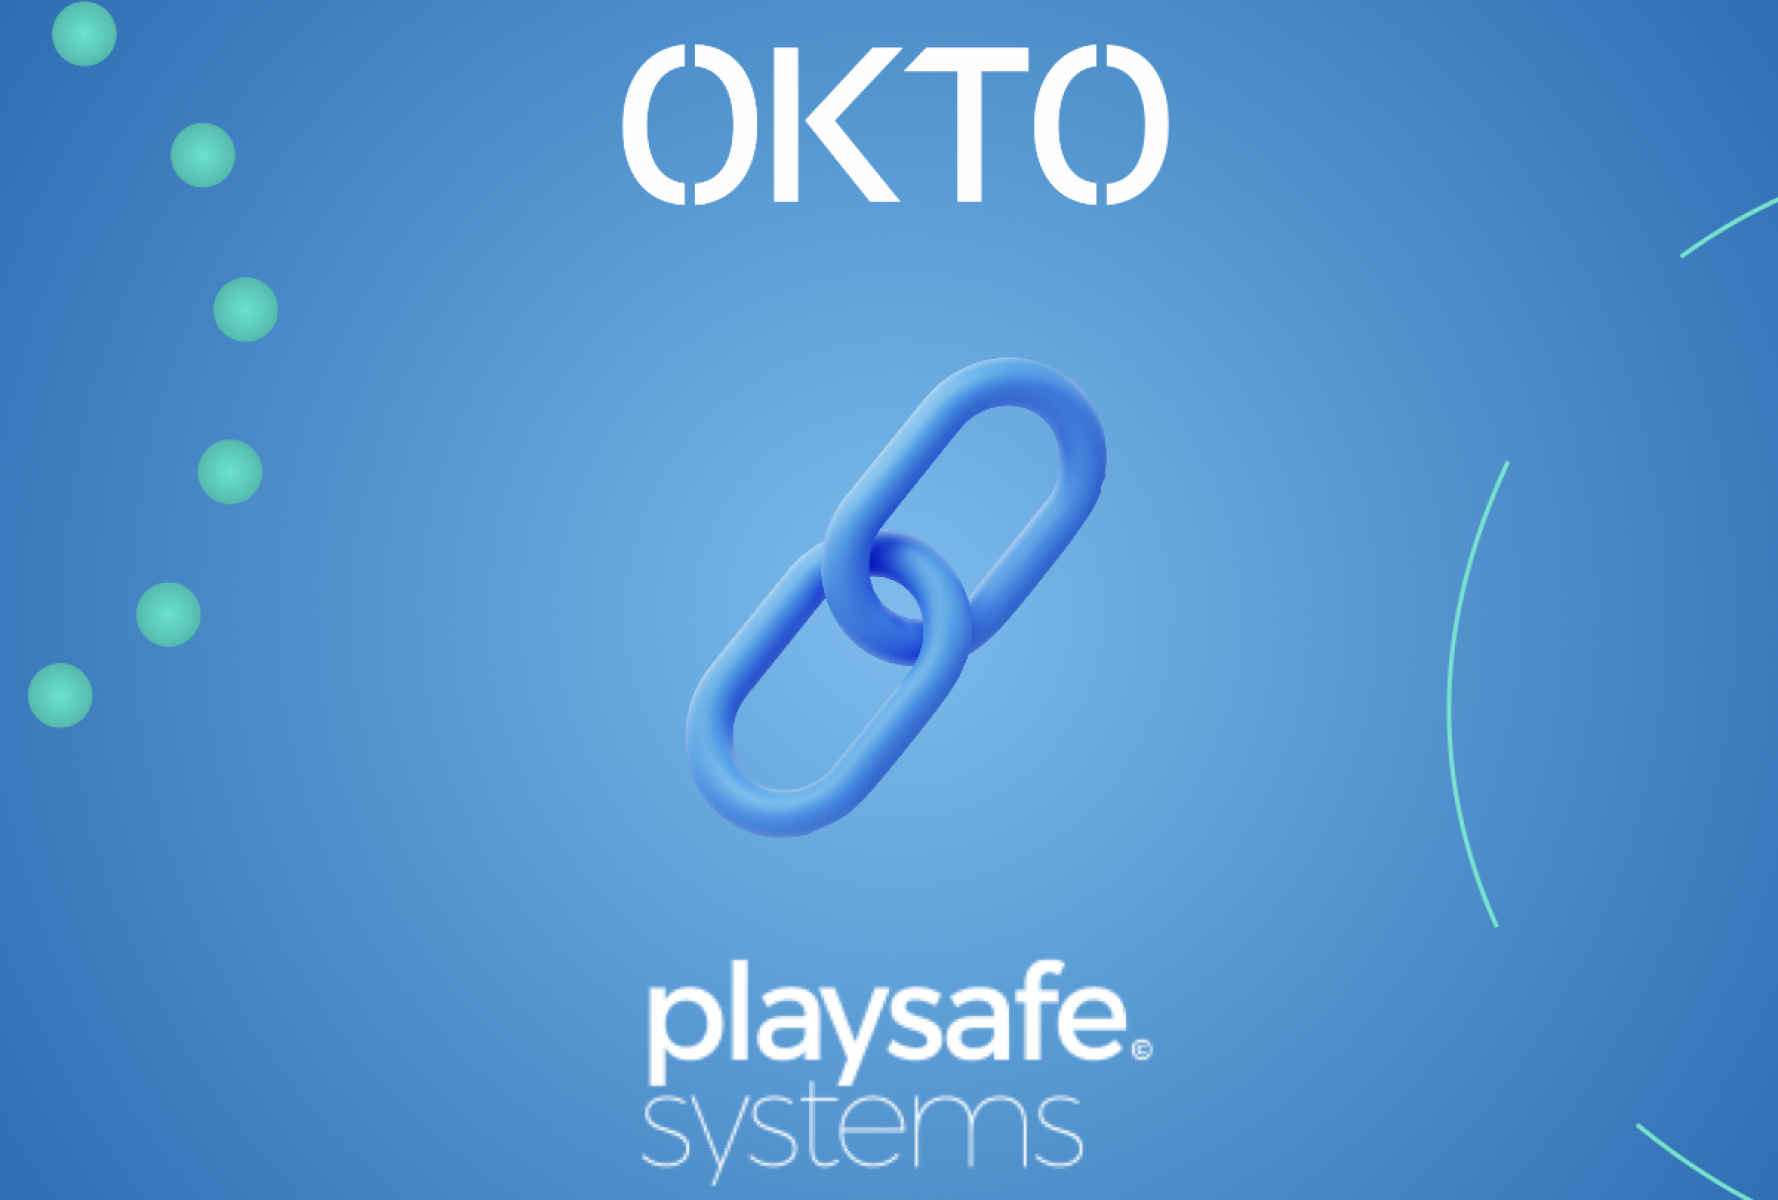 OKTO’s frictionless Cashless Payments Solutions now available with Playsafe Systems